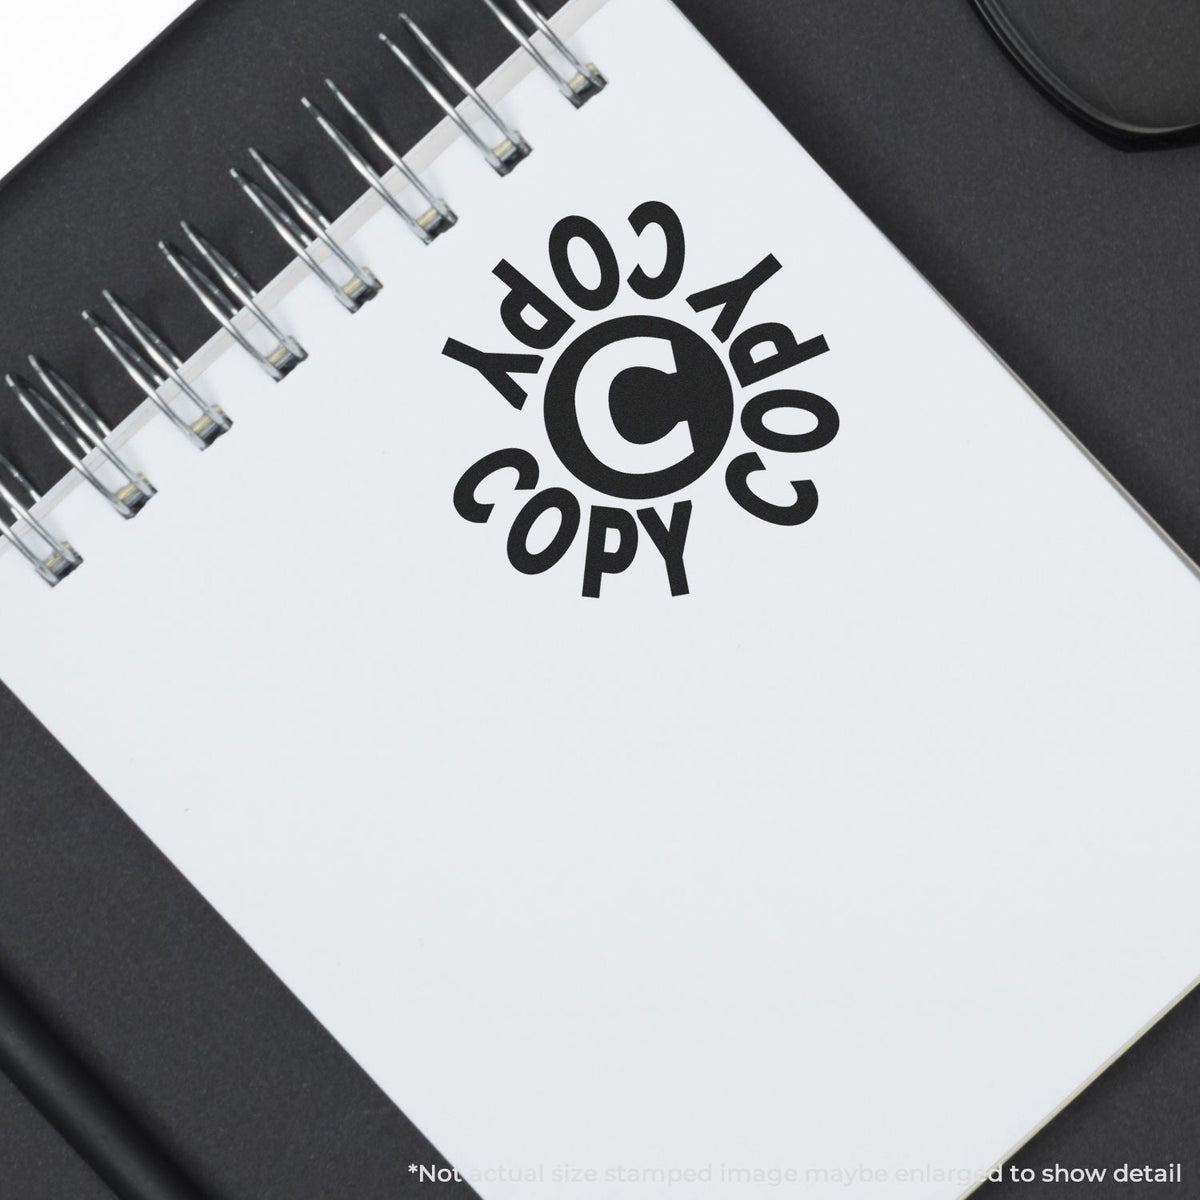 In Use Self-Inking Round Copy Copy Copy Stamp Image